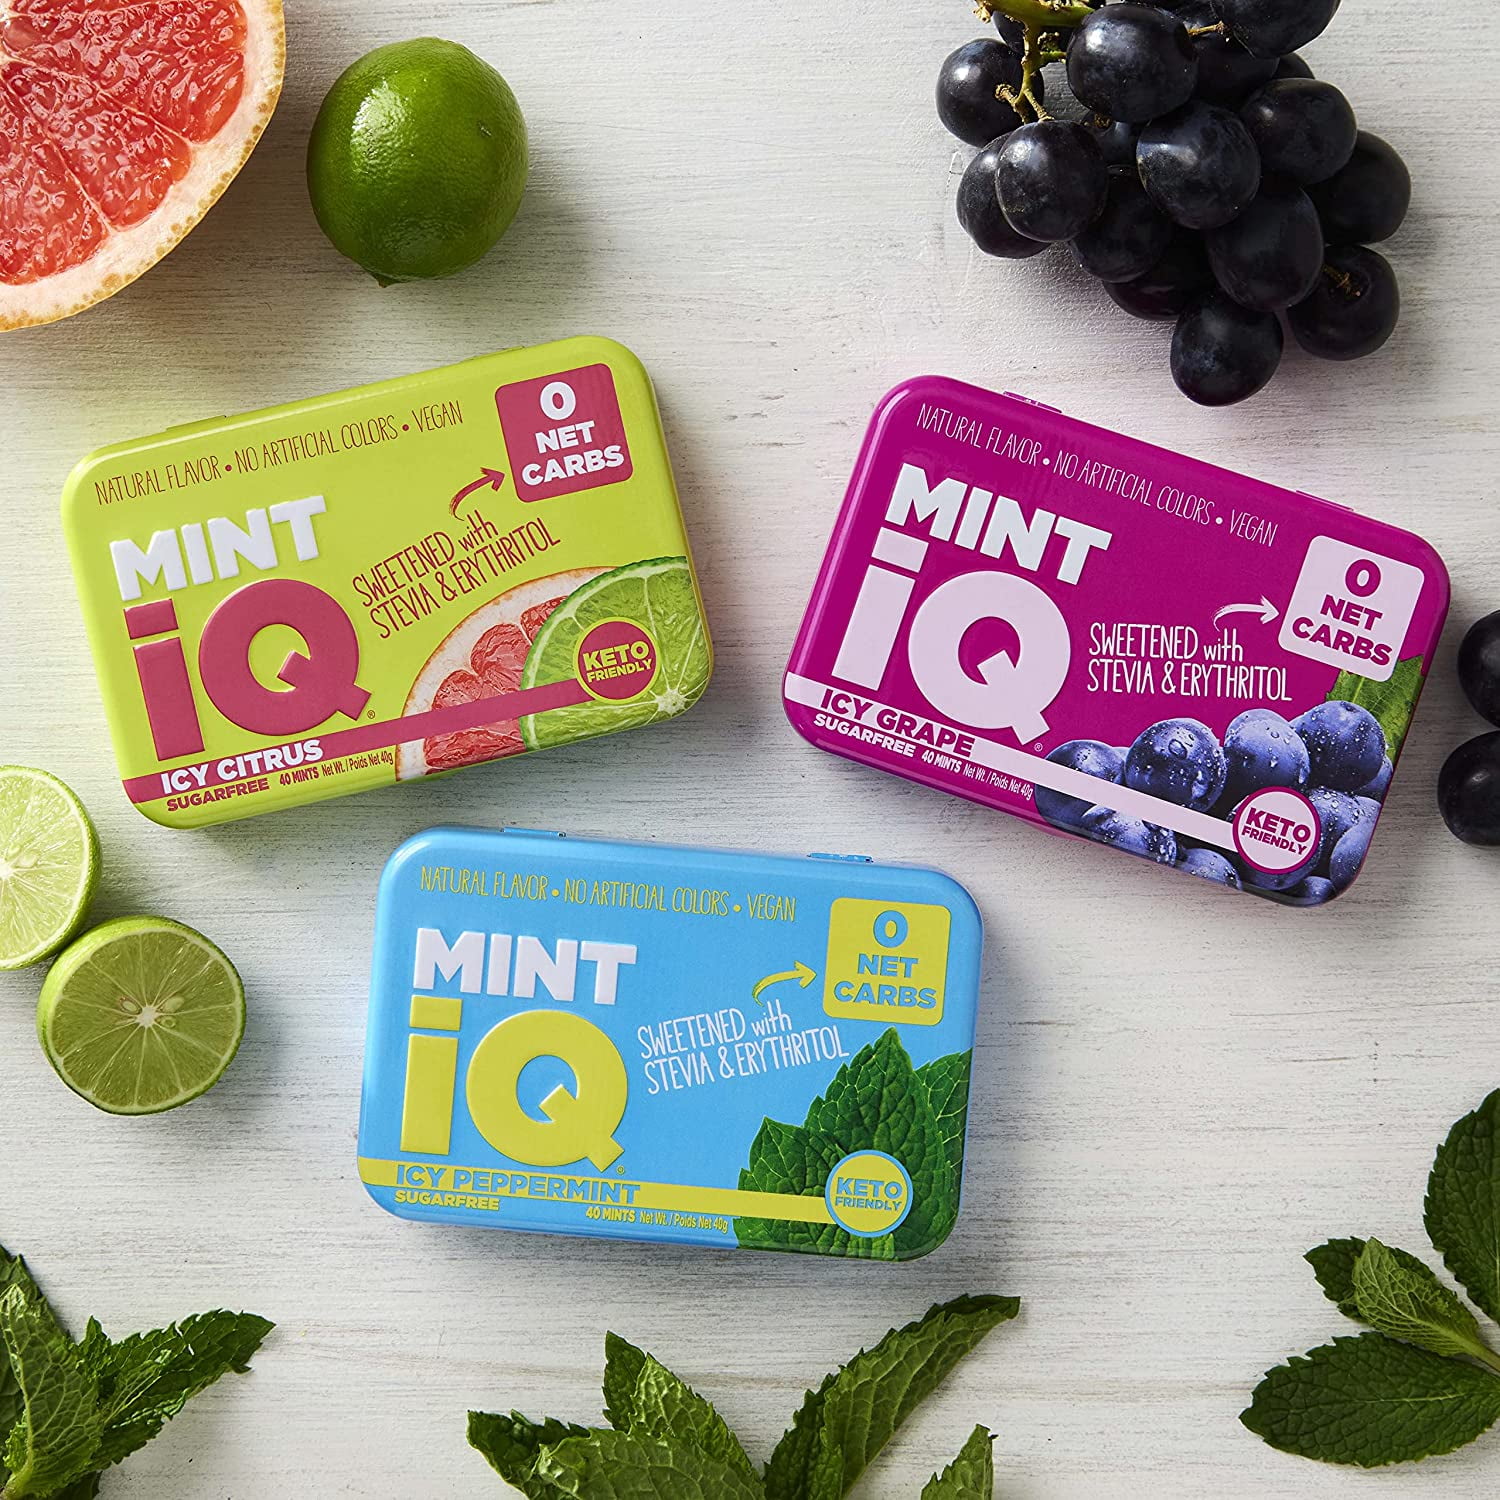 Big Sky MINT iQ Icy Grape Mint Candy 40 grams Pack of 6 Tins in Display  Tray - Travel Size Mint Candies Tin - Keto Friendly